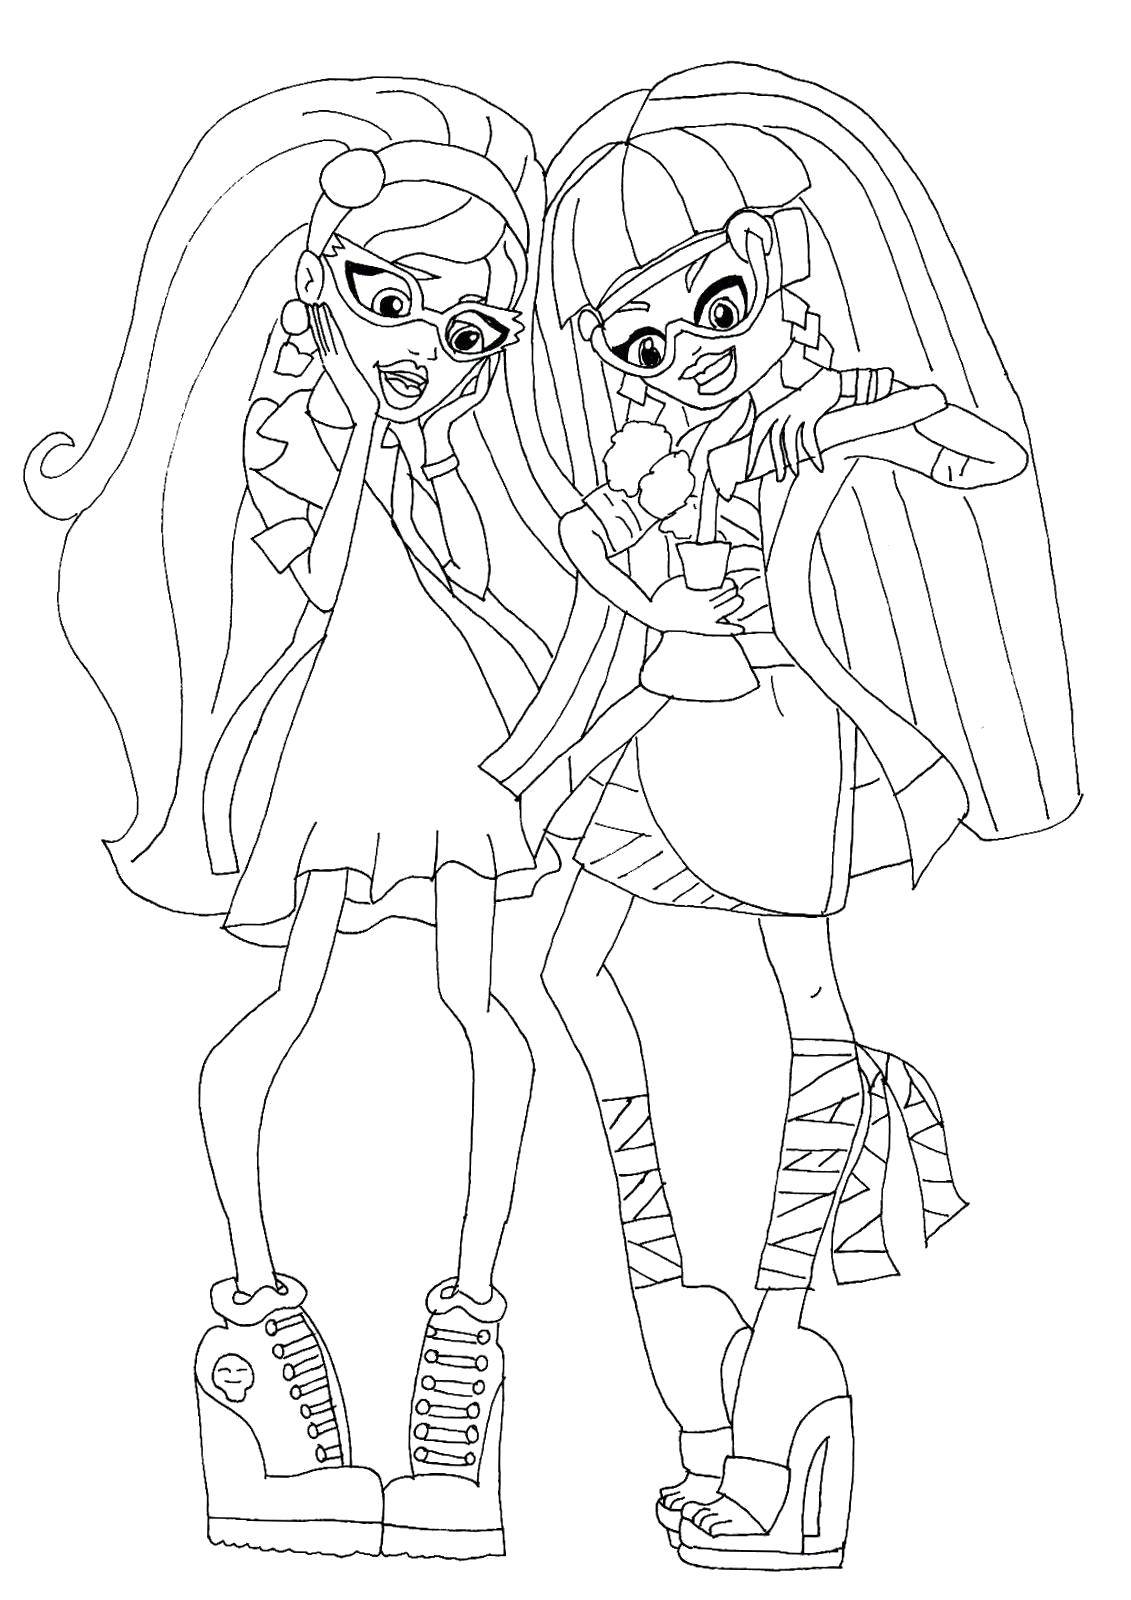 Coloring Student. Category school of monsters. Tags:  Monster High.